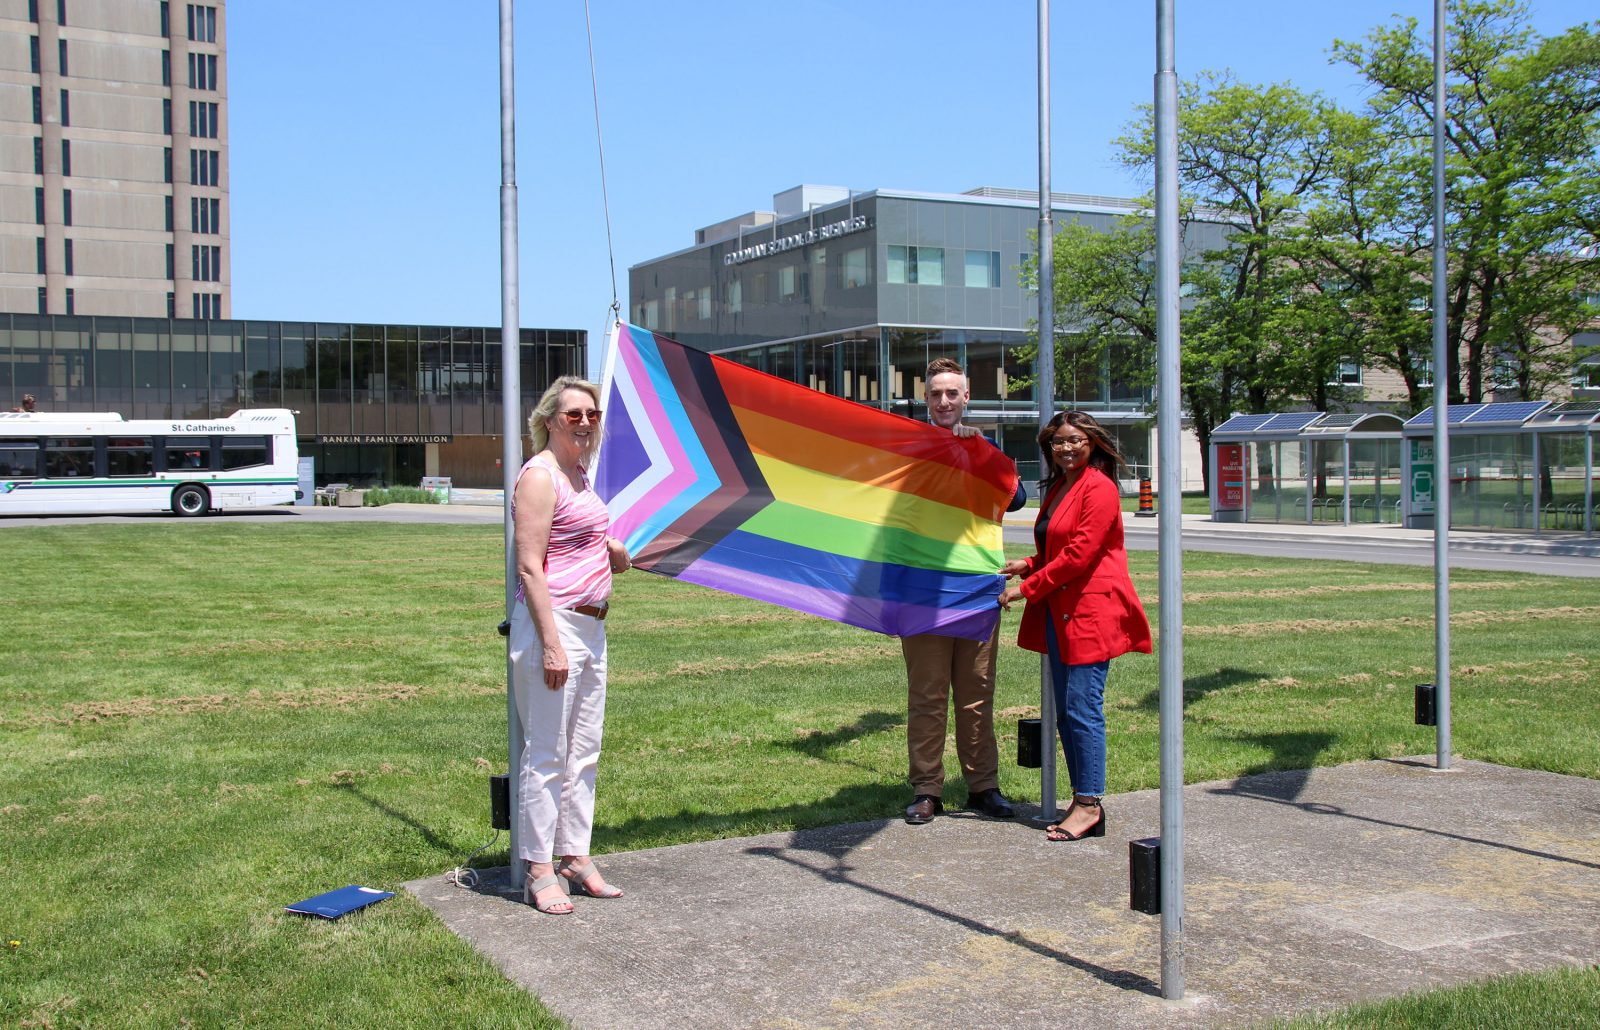 A woman in a pink shirt, a man in brown pants and a woman in a red blazer hold an All-inclusive flag, prior to it being raised.